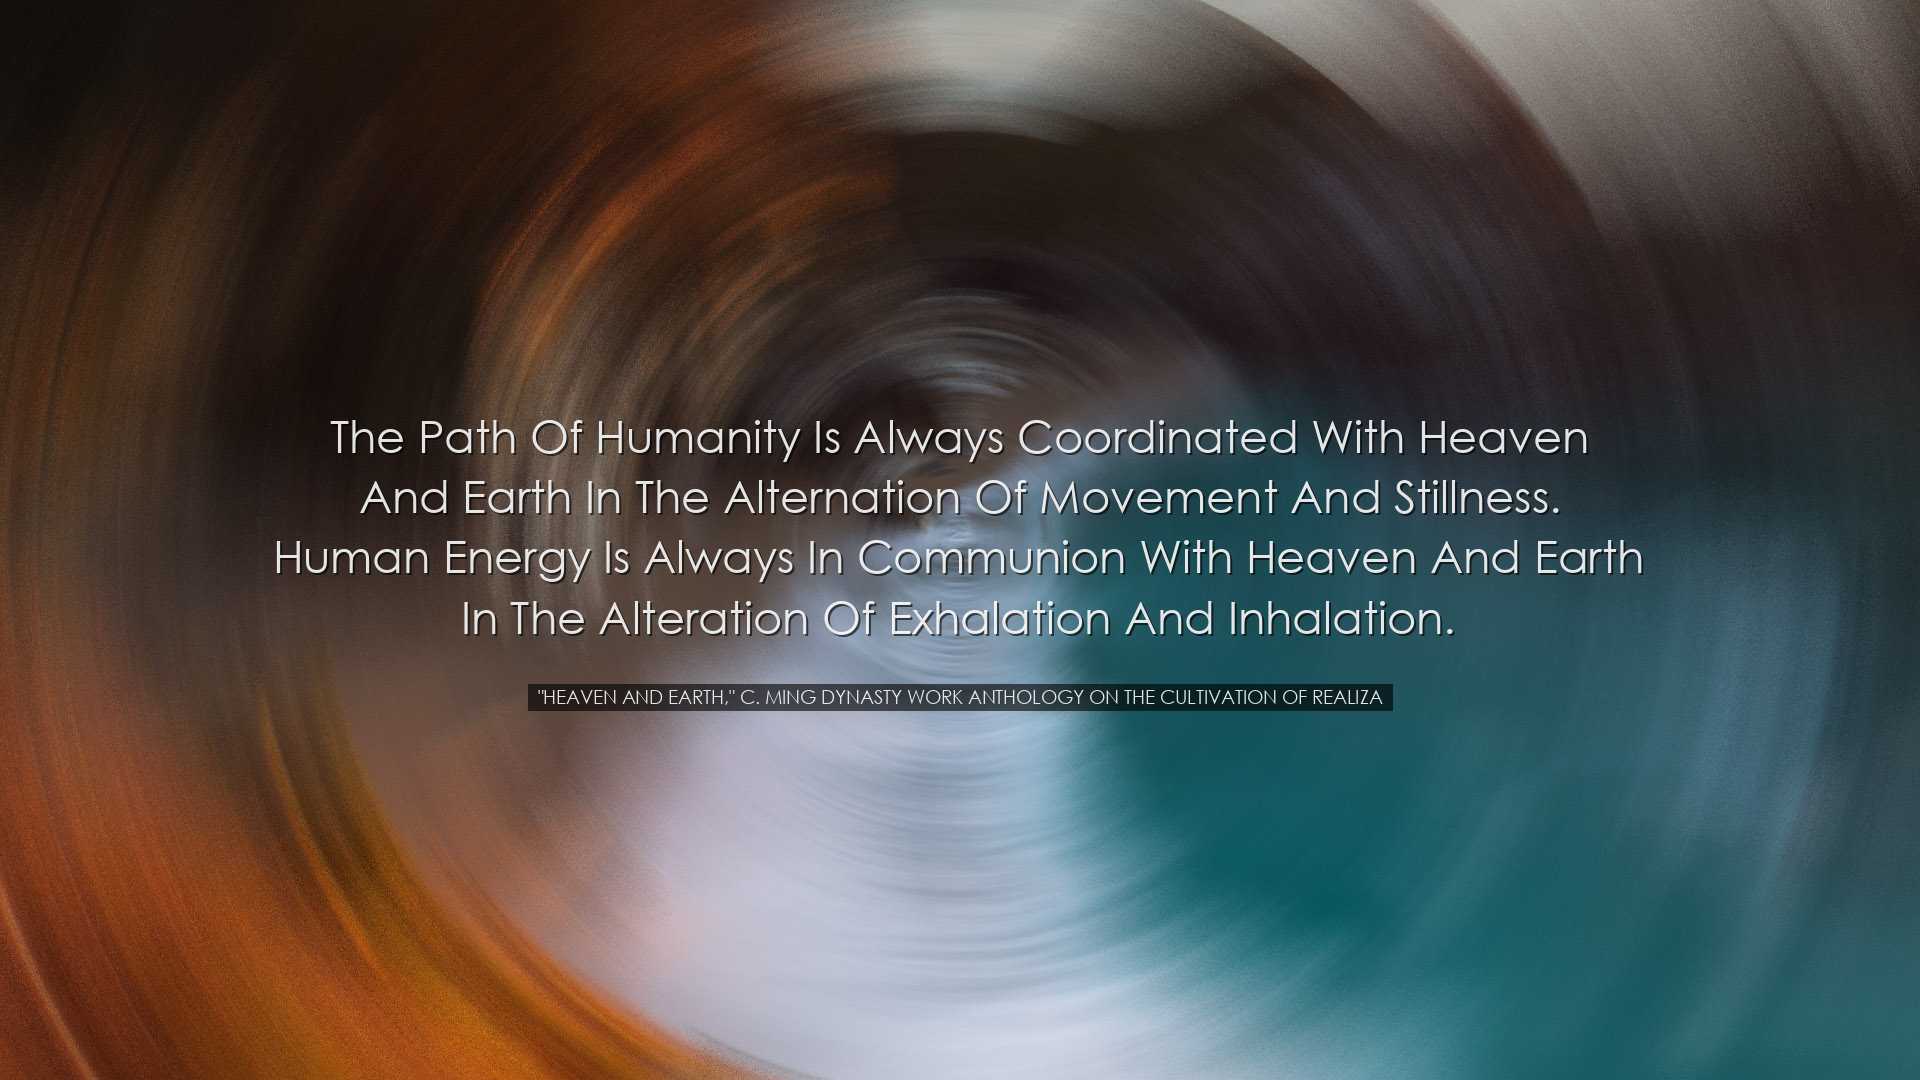 The path of humanity is always coordinated with heaven and earth i